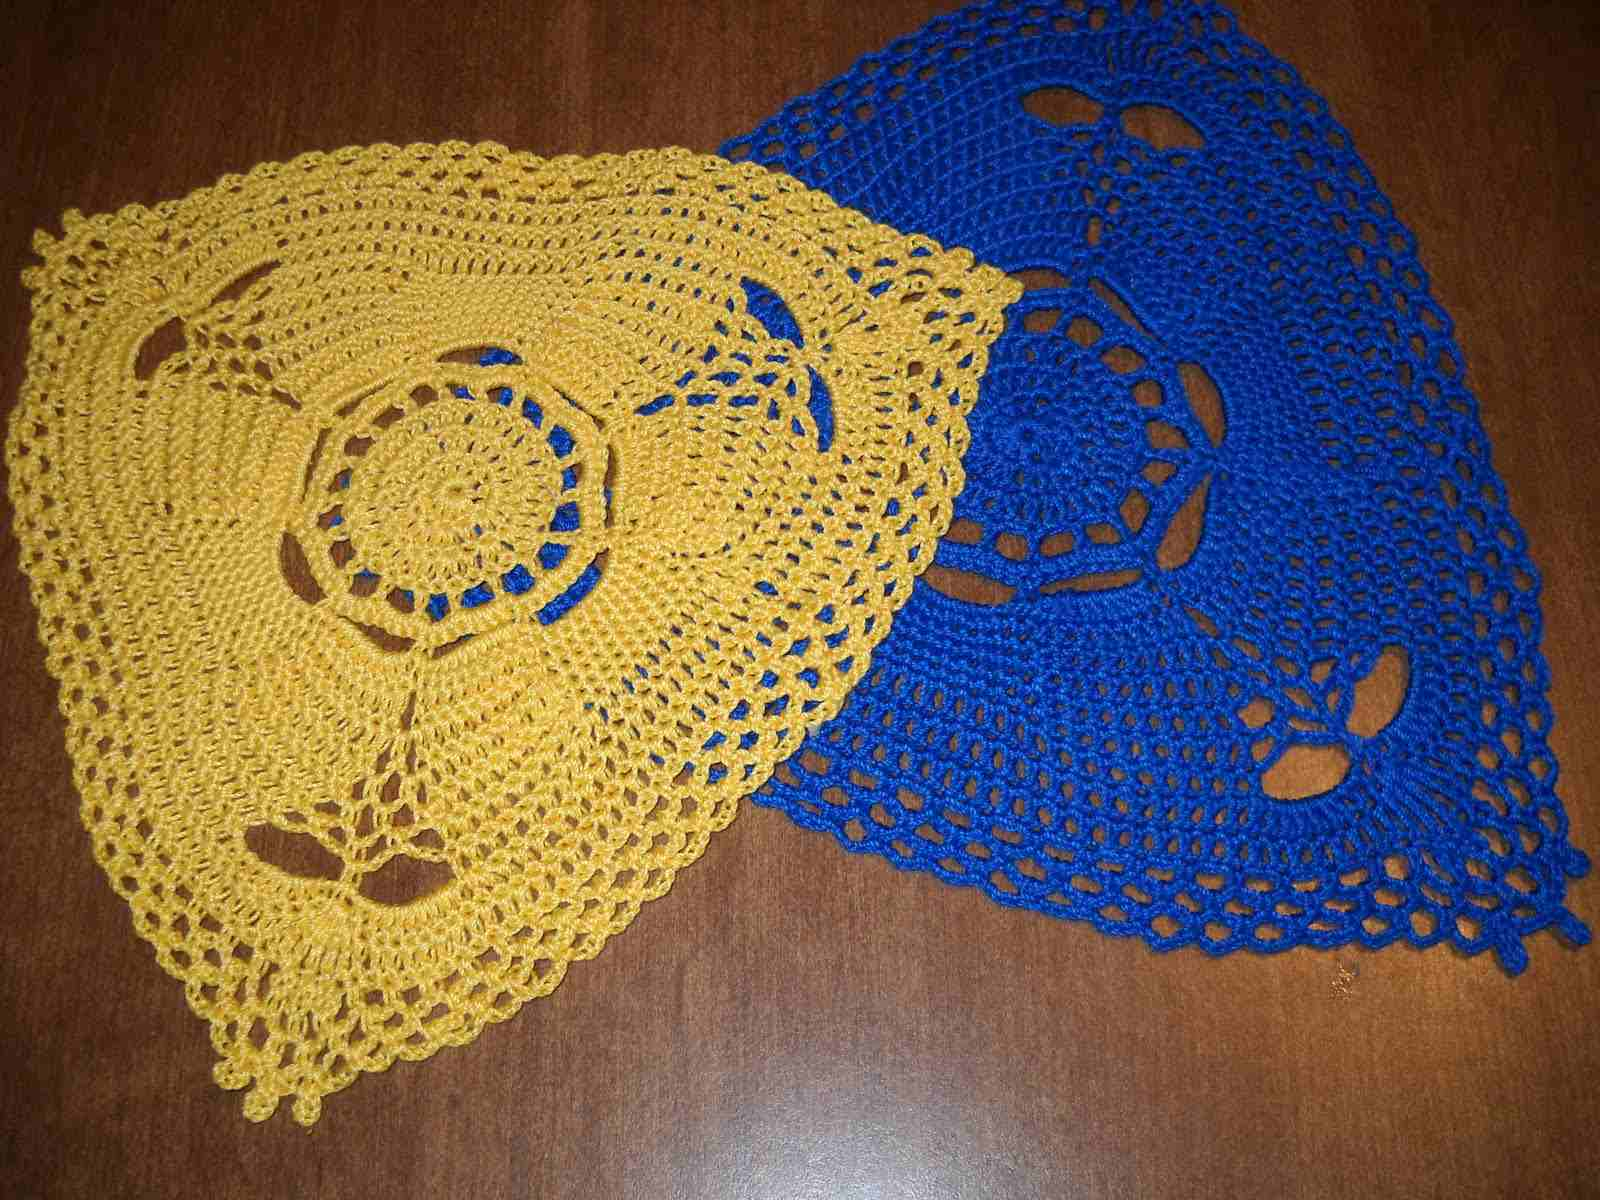 Easy Crochet Doily Patterns For Beginners 10 Free Thread And Lace Crochet Doily Patterns